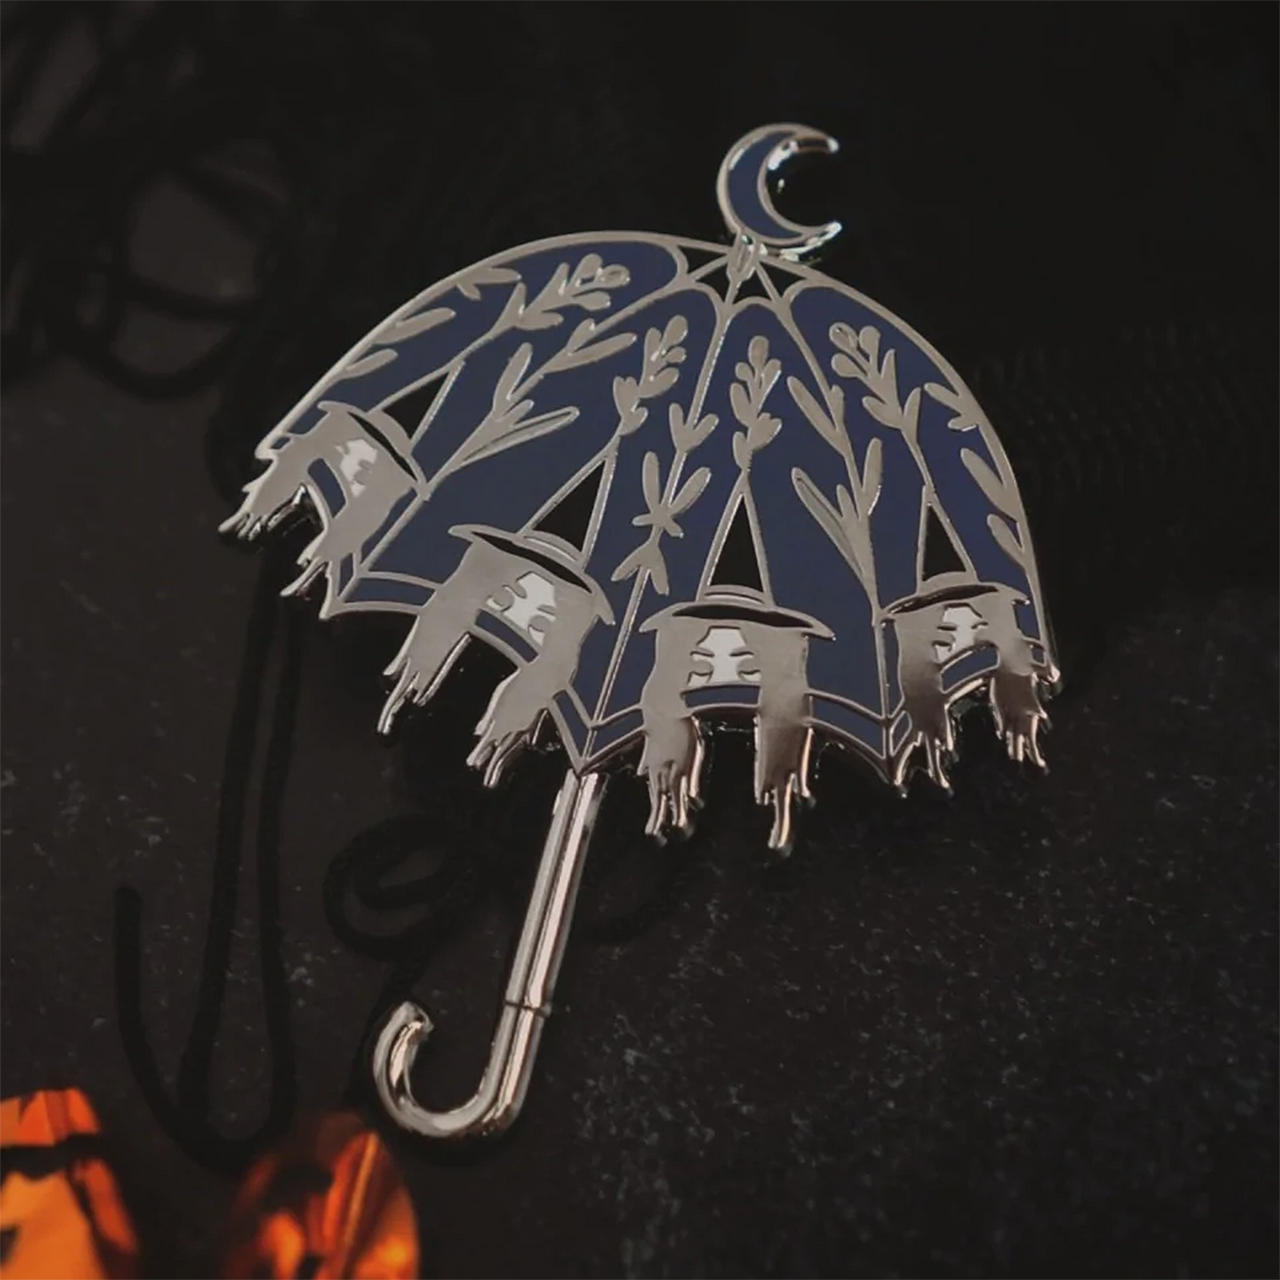 LIVELY GHOSTS COVEN UMBRELLA ENAMEL PIN